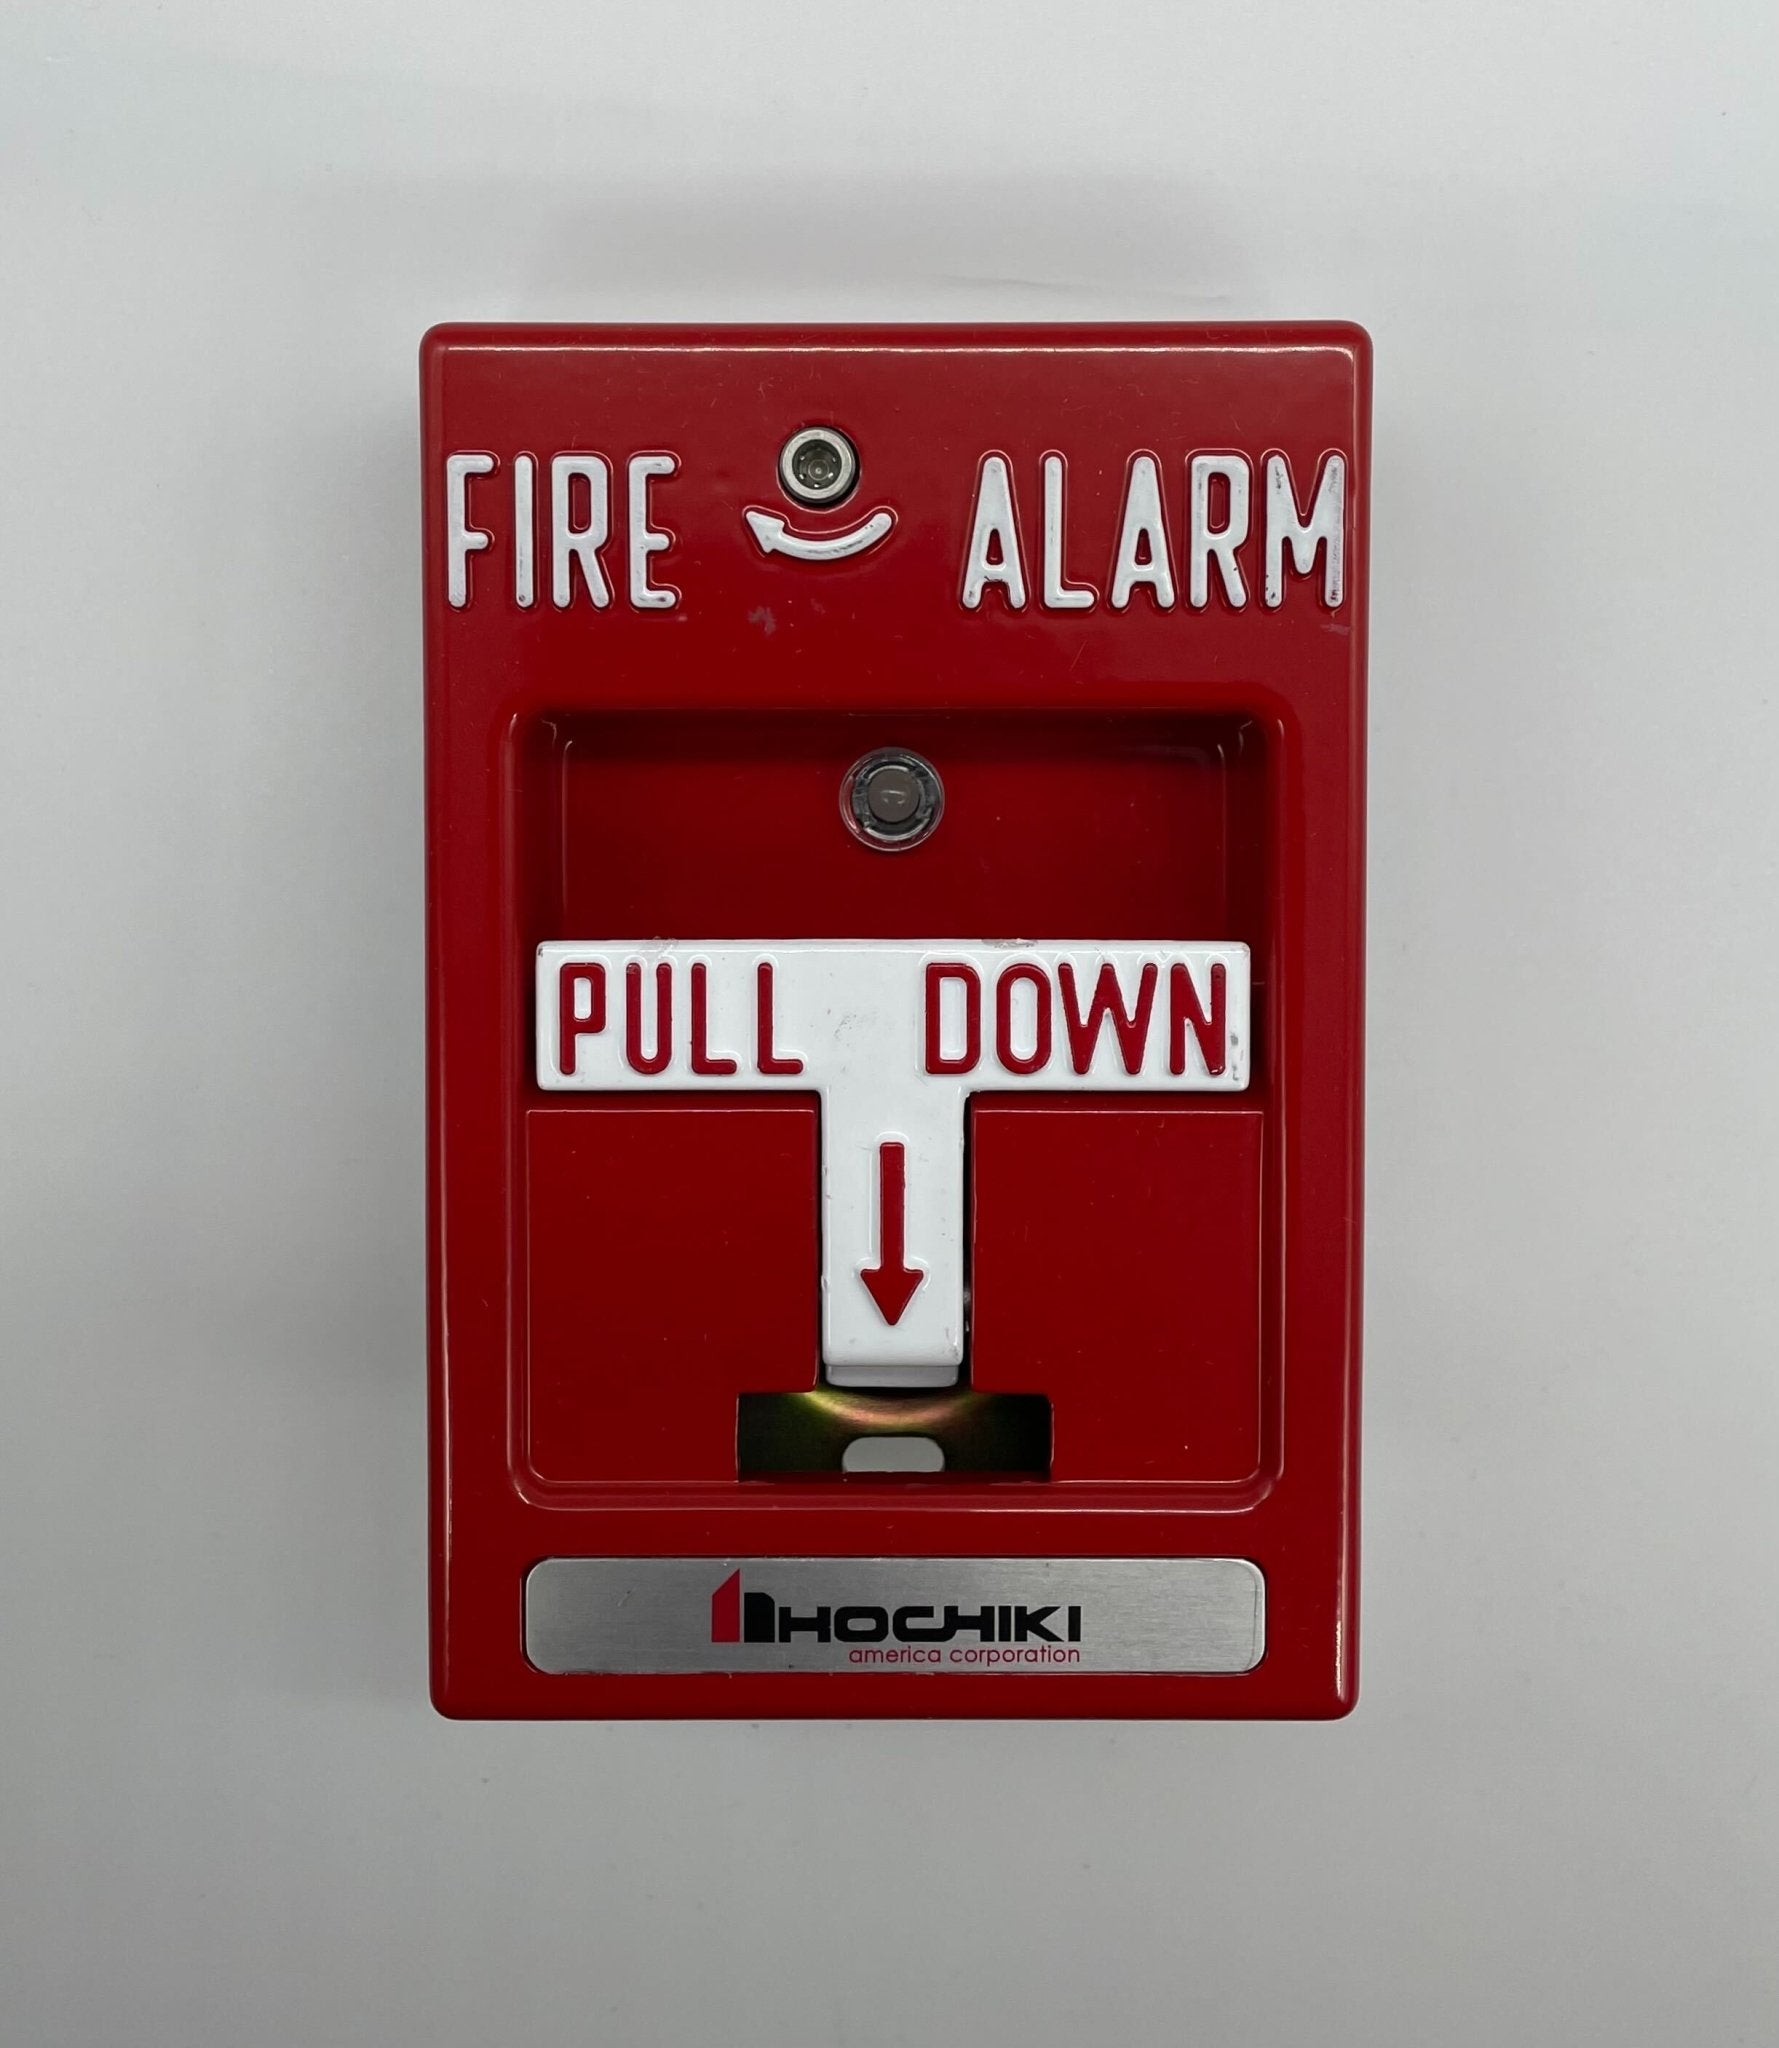 Hochiki DCP-AMS Single Action Add Manual Ps - The Fire Alarm Supplier